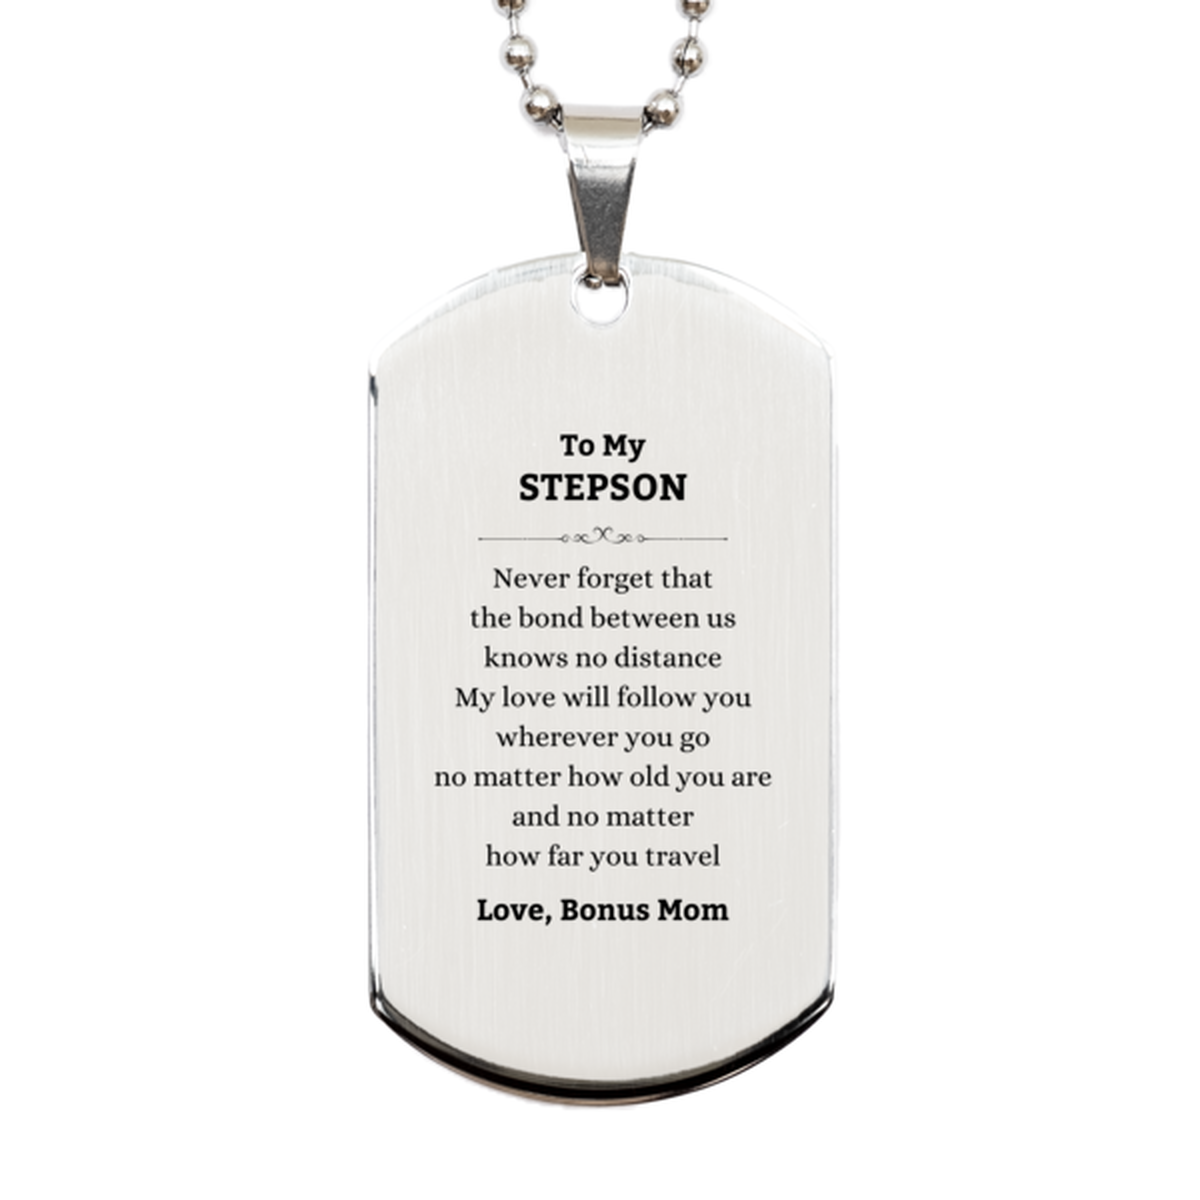 Stepson Birthday Gifts from Bonus Mom, Adjustable Silver Dog Tag for Stepson Christmas Graduation Unique Gifts Stepson Never forget that the bond between us knows no distance. Love, Bonus Mom